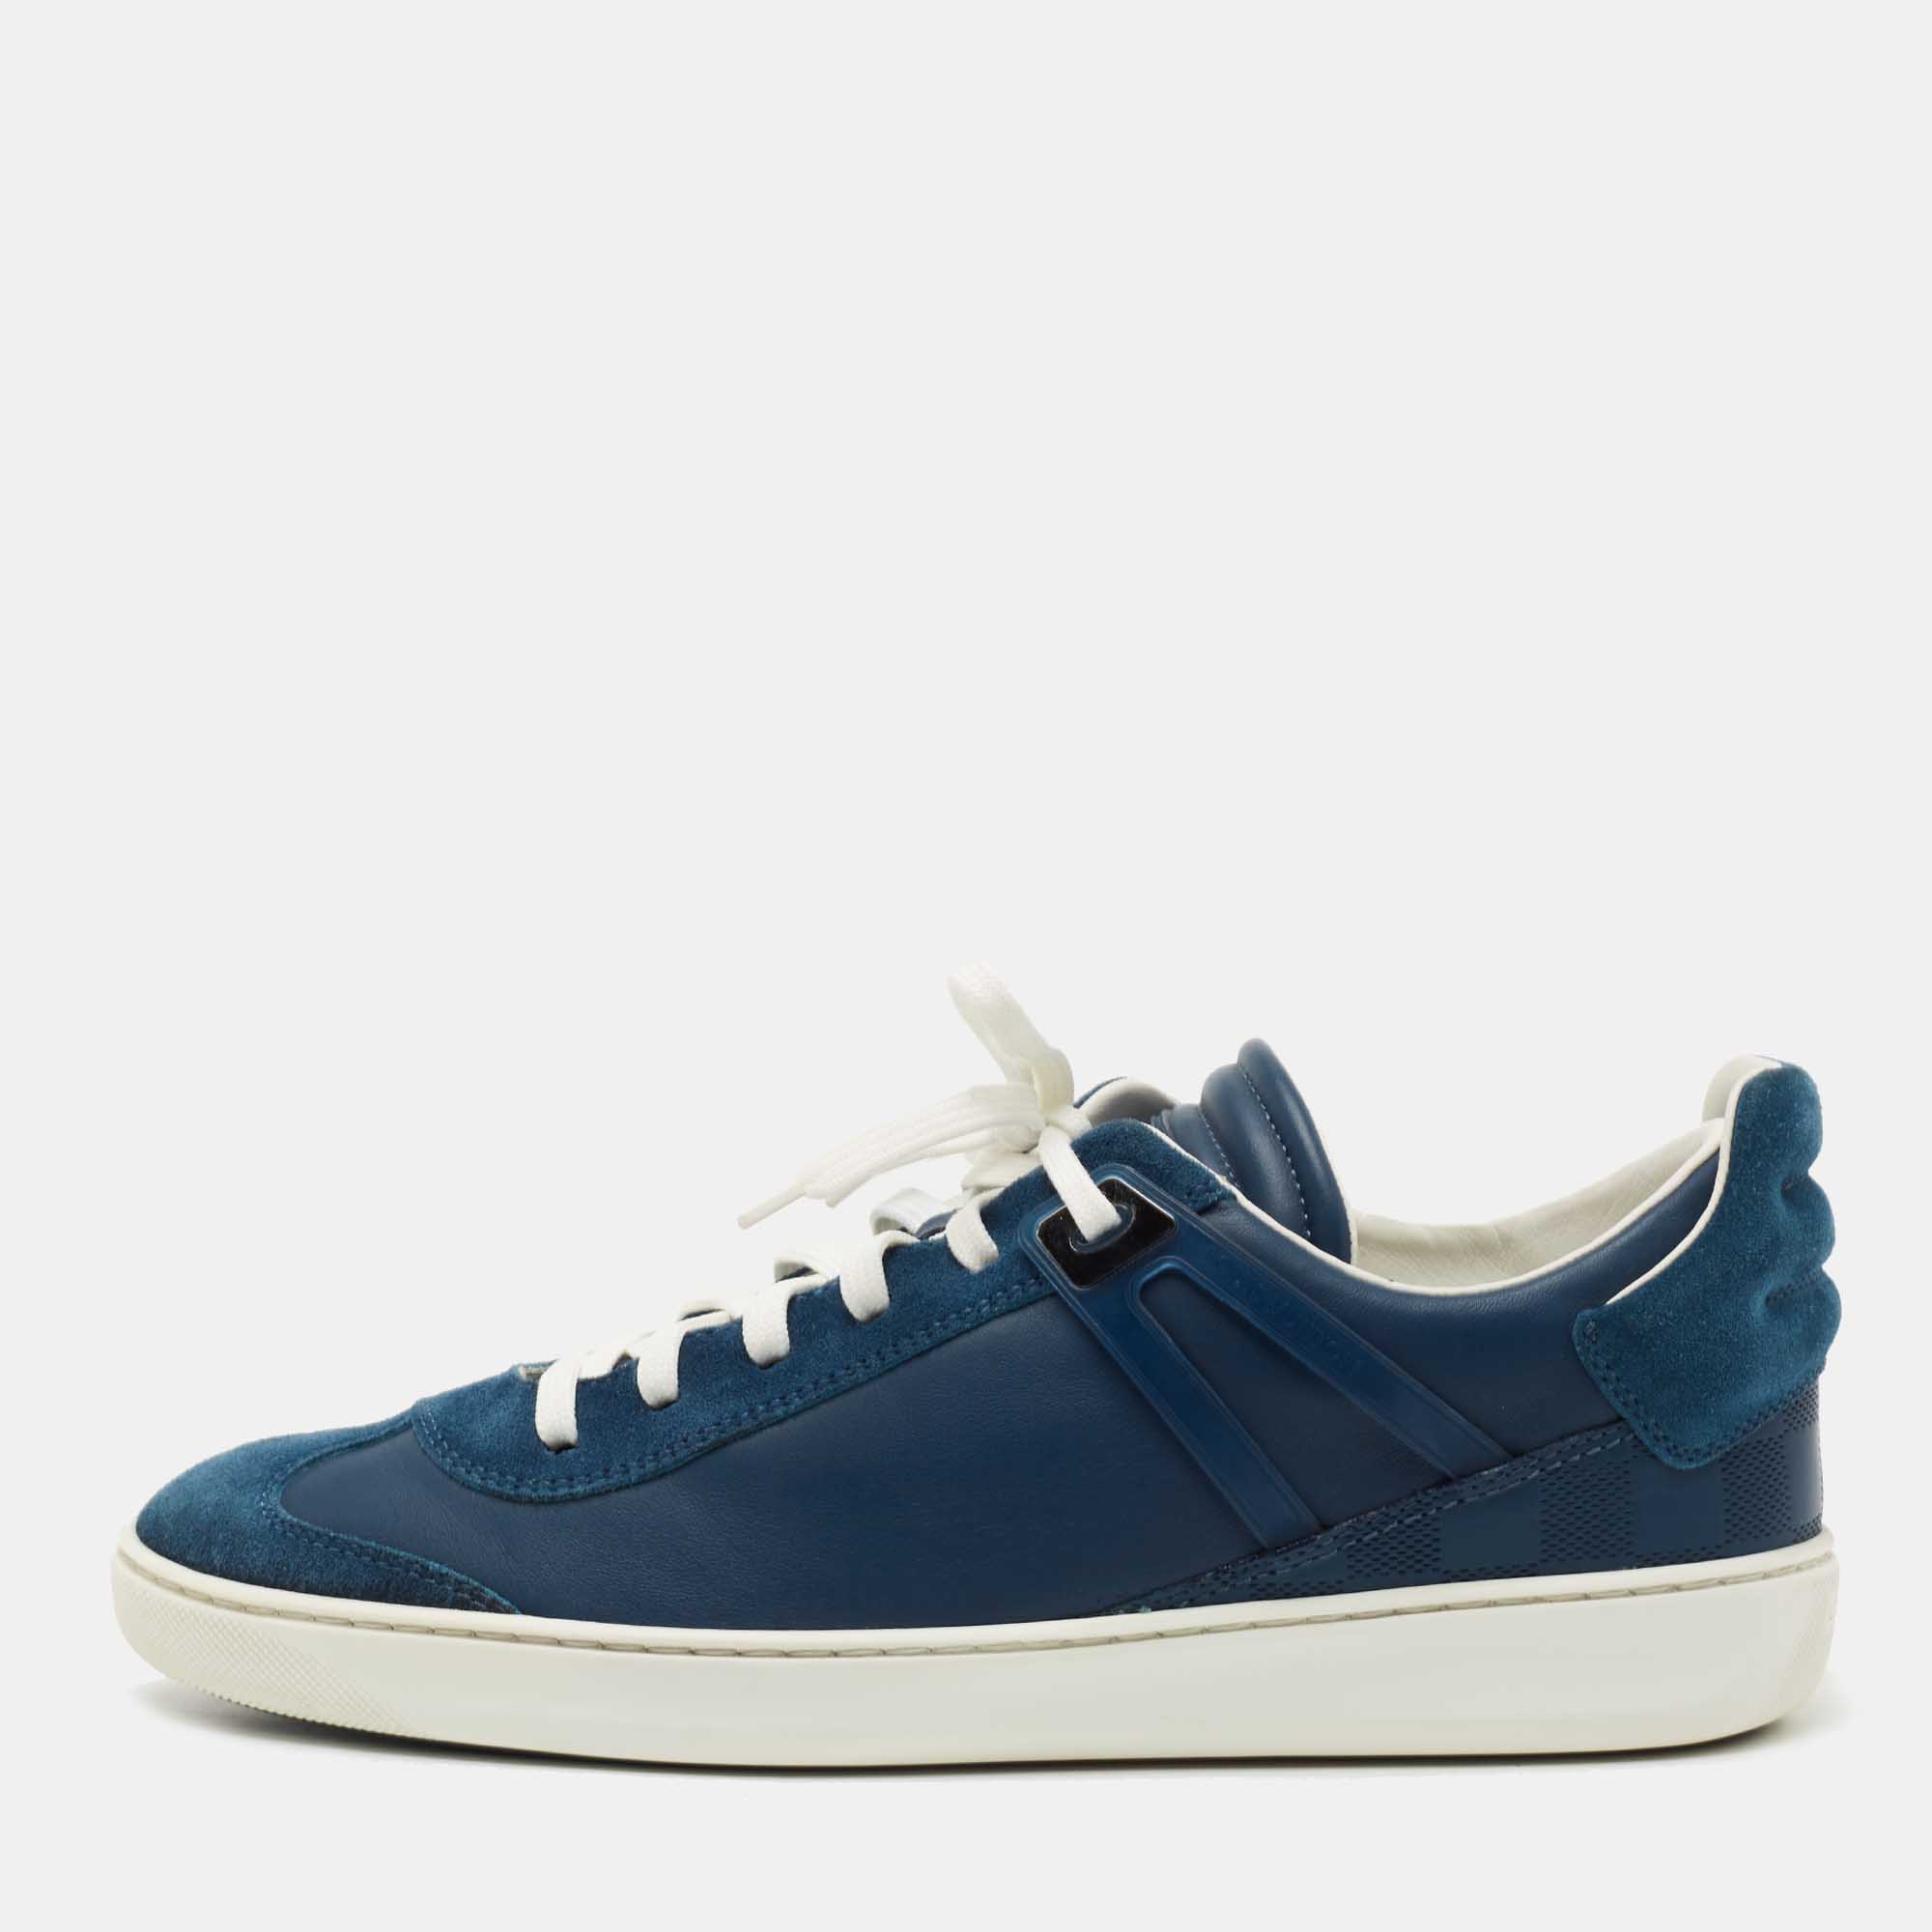 Pre-owned Louis Vuitton Blue Leather And Suede Low Top Sneakers Size 40.5